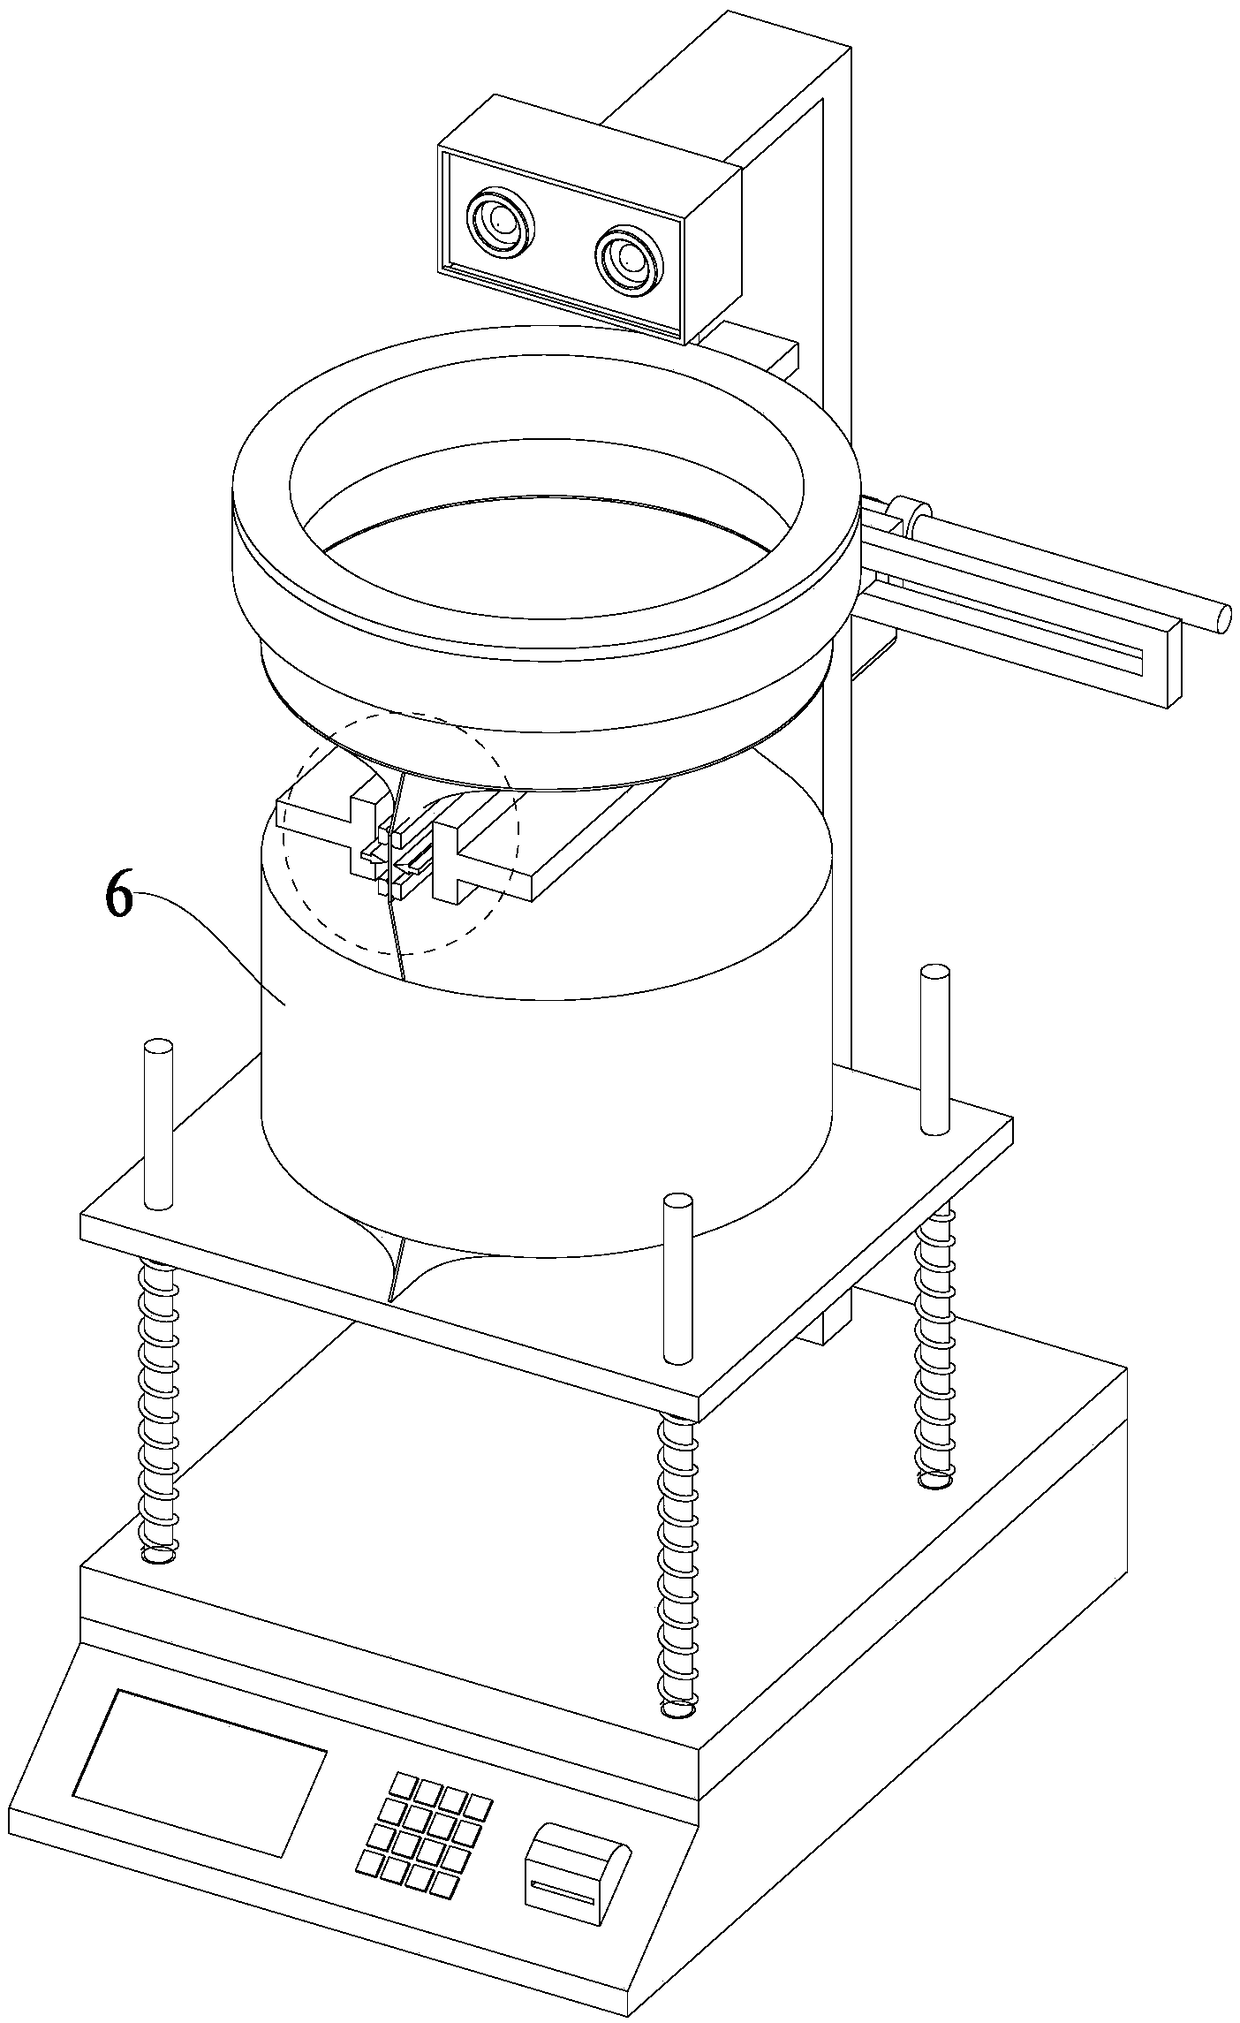 Self-weighing device